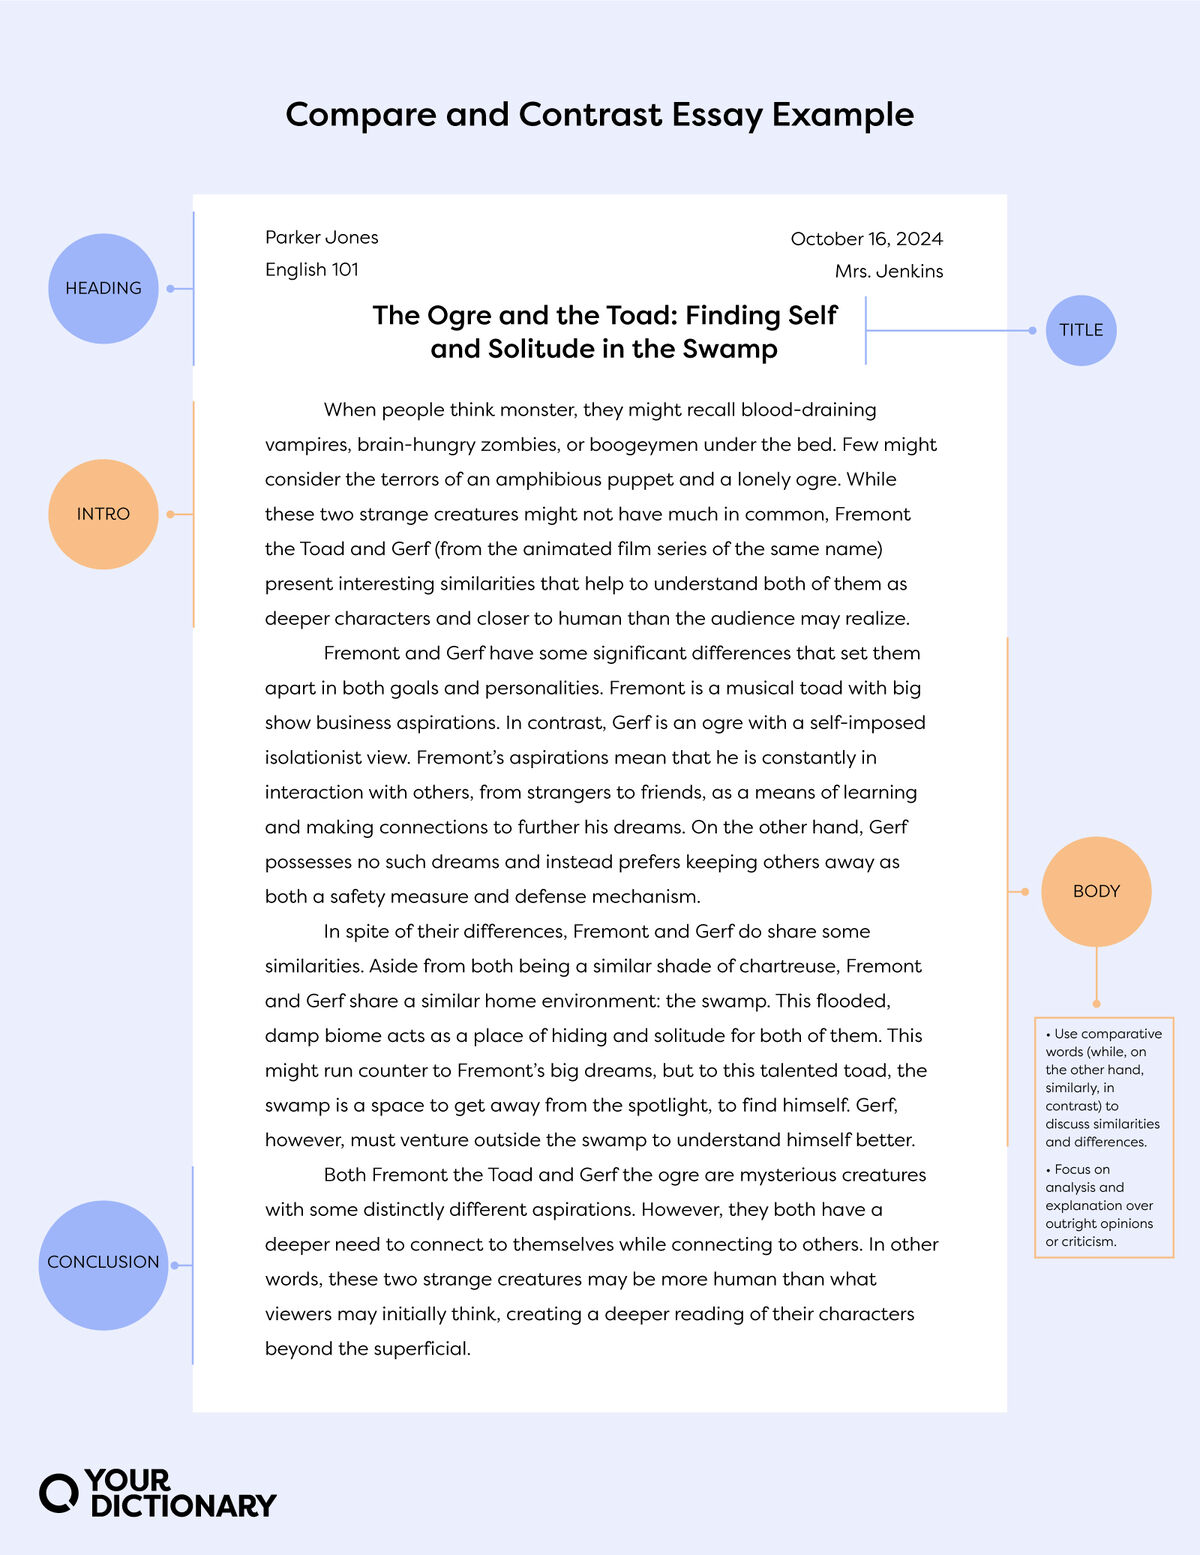 full compare and contrast essay example from the article with labeled parts